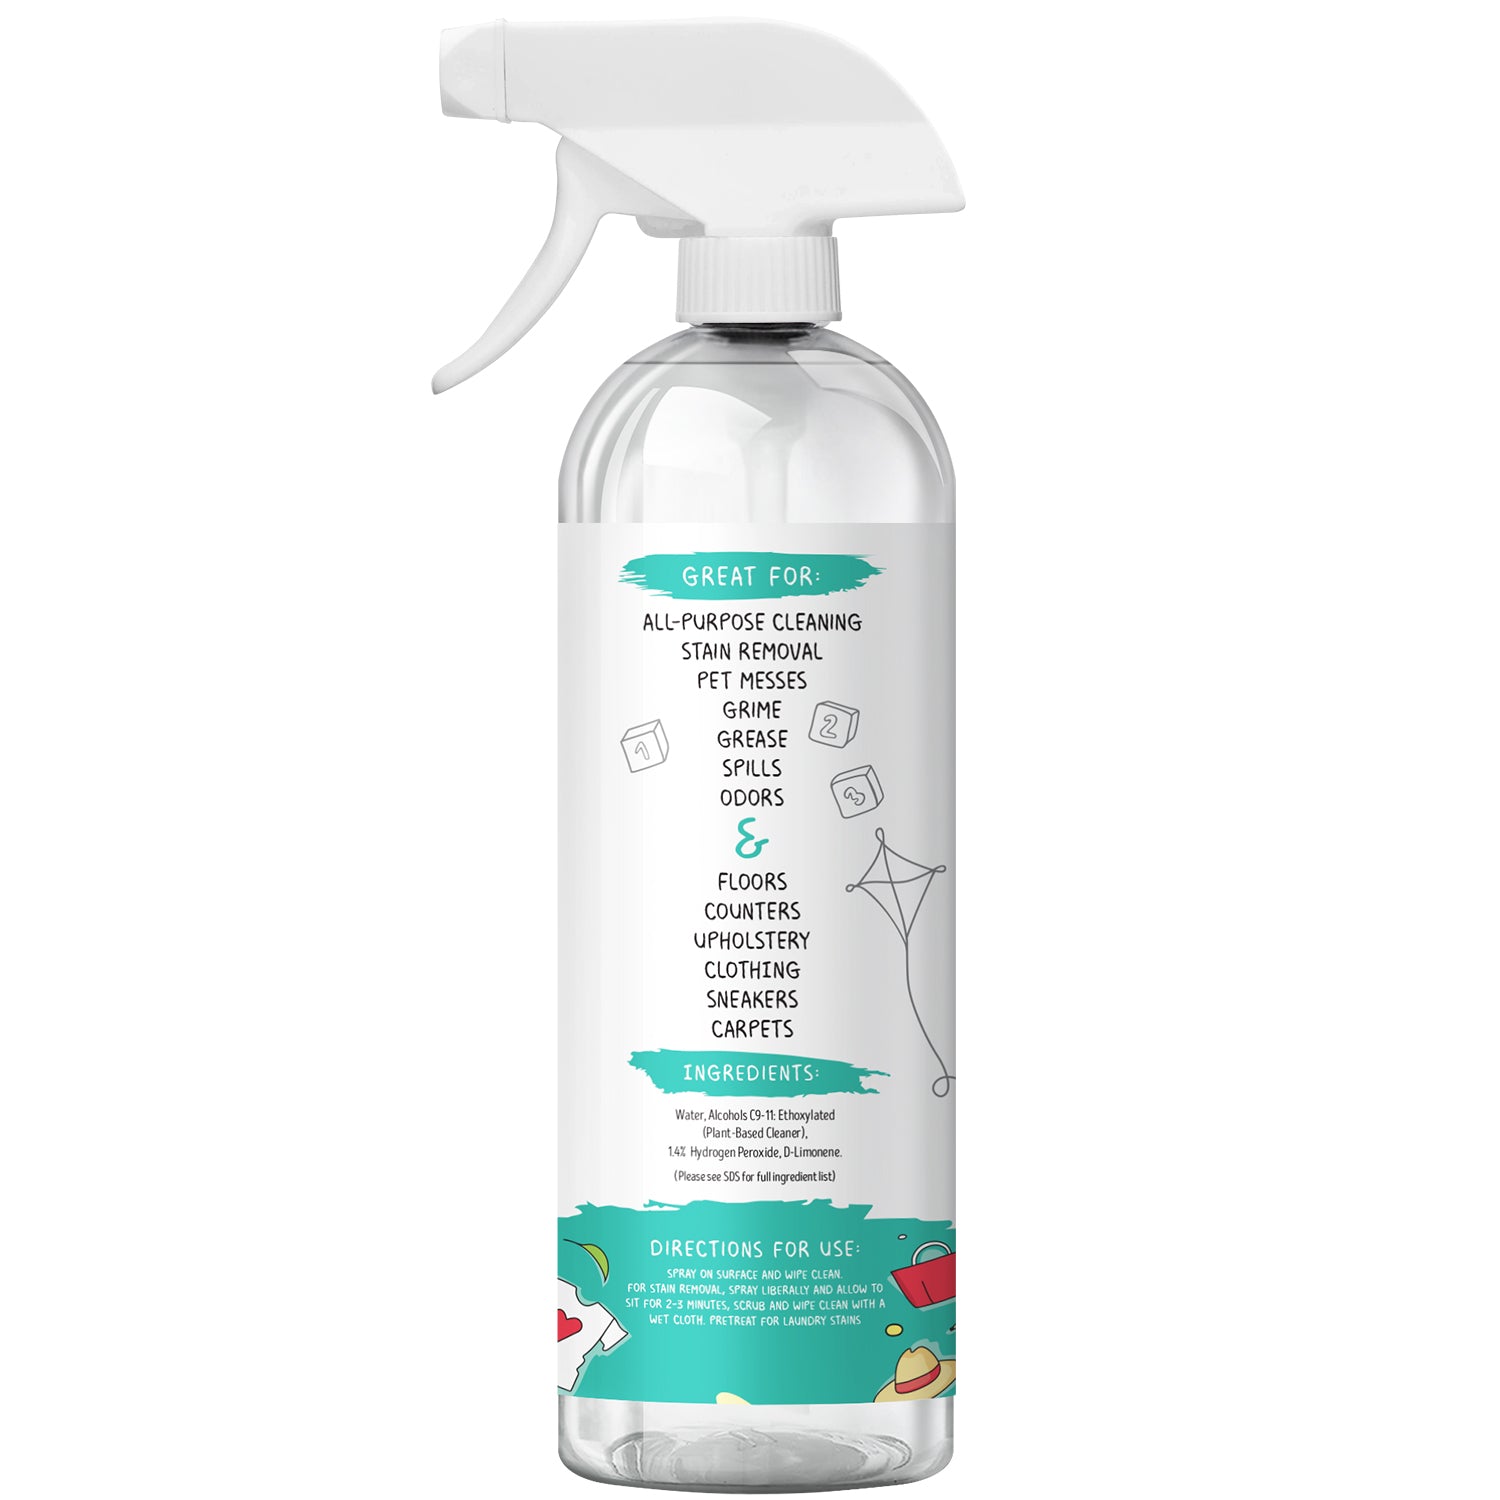 MomRemedy Hydrogen Peroxide Cleaner and stain remover for stains, spills, dirt. grime, pet messes, odors. Great for kitchens and everything household. Ingredients you can trust.